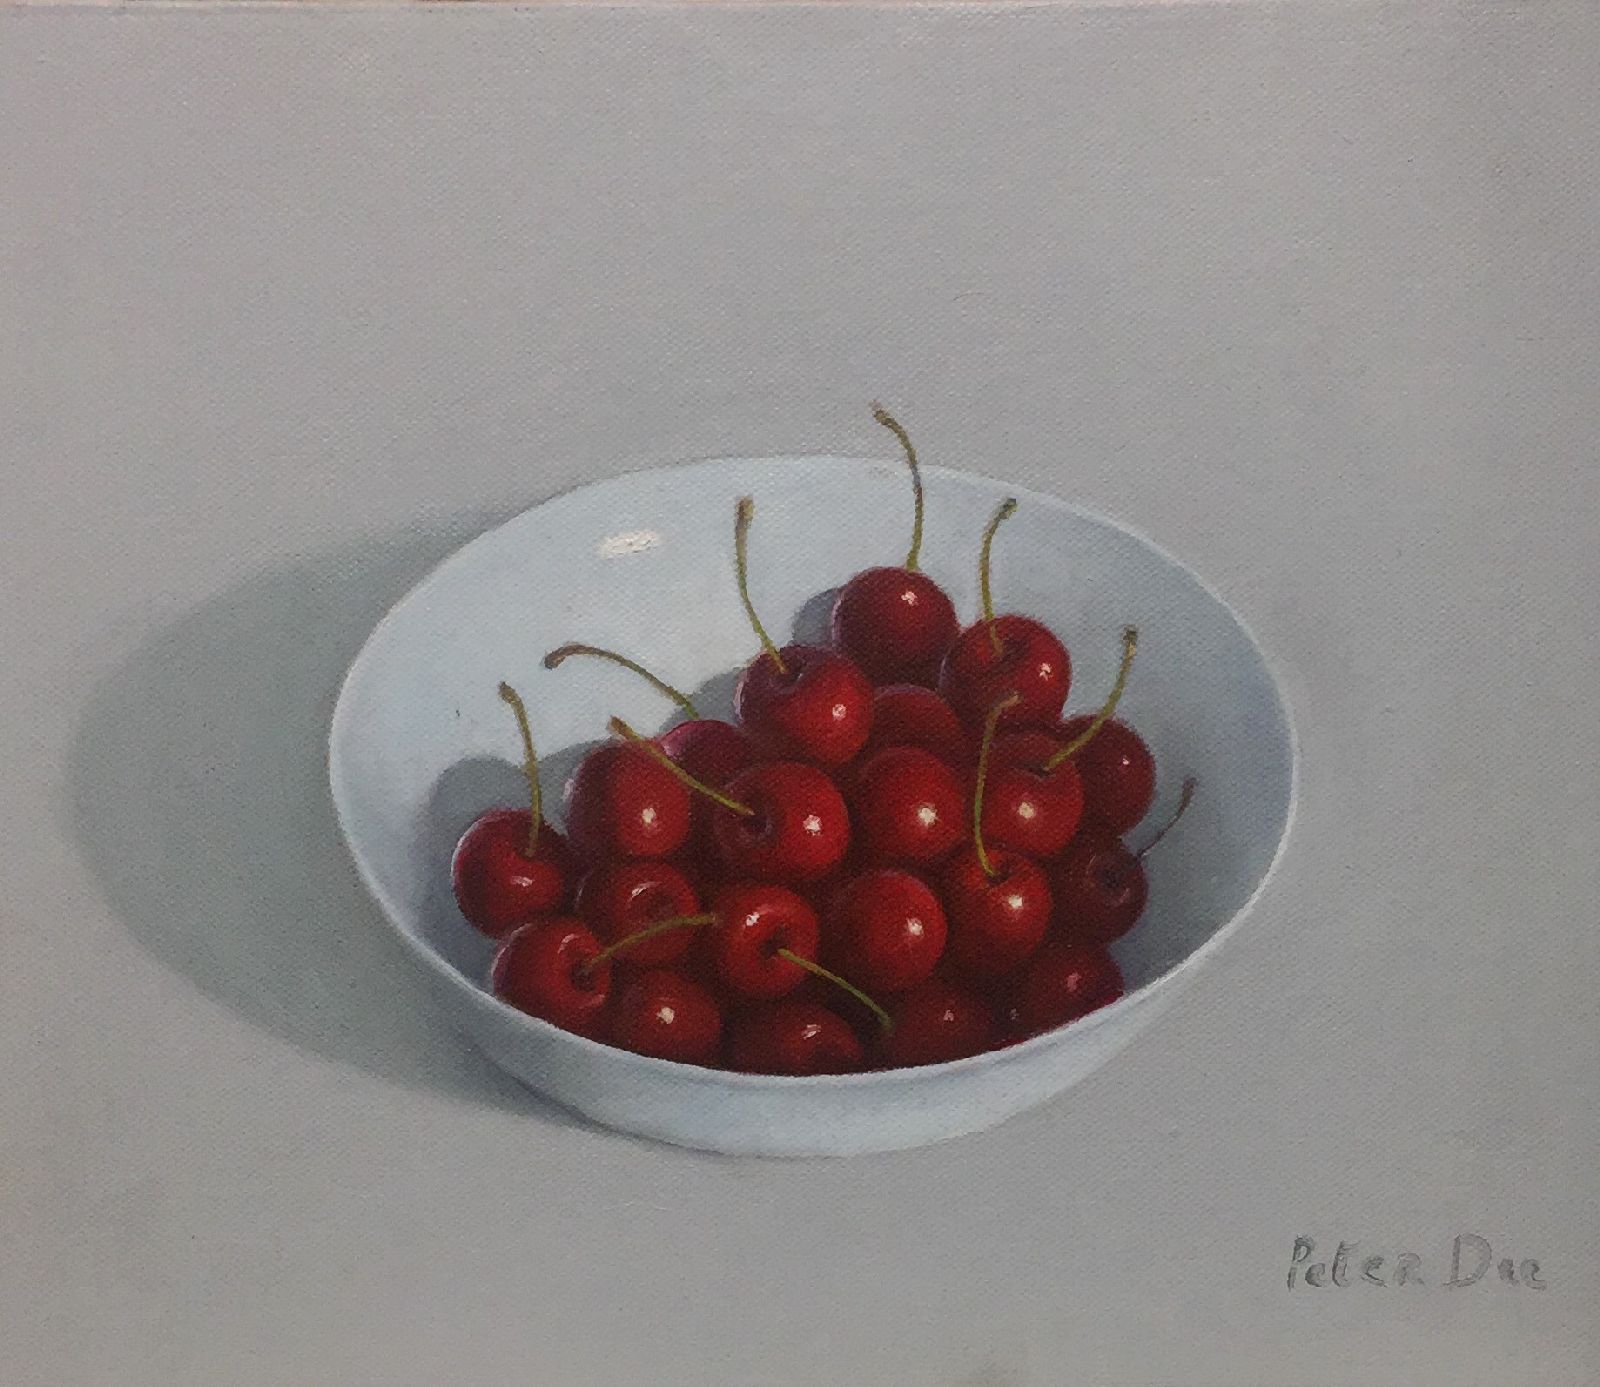 Peter Dee - Bowl of Red Cherries Still Life 